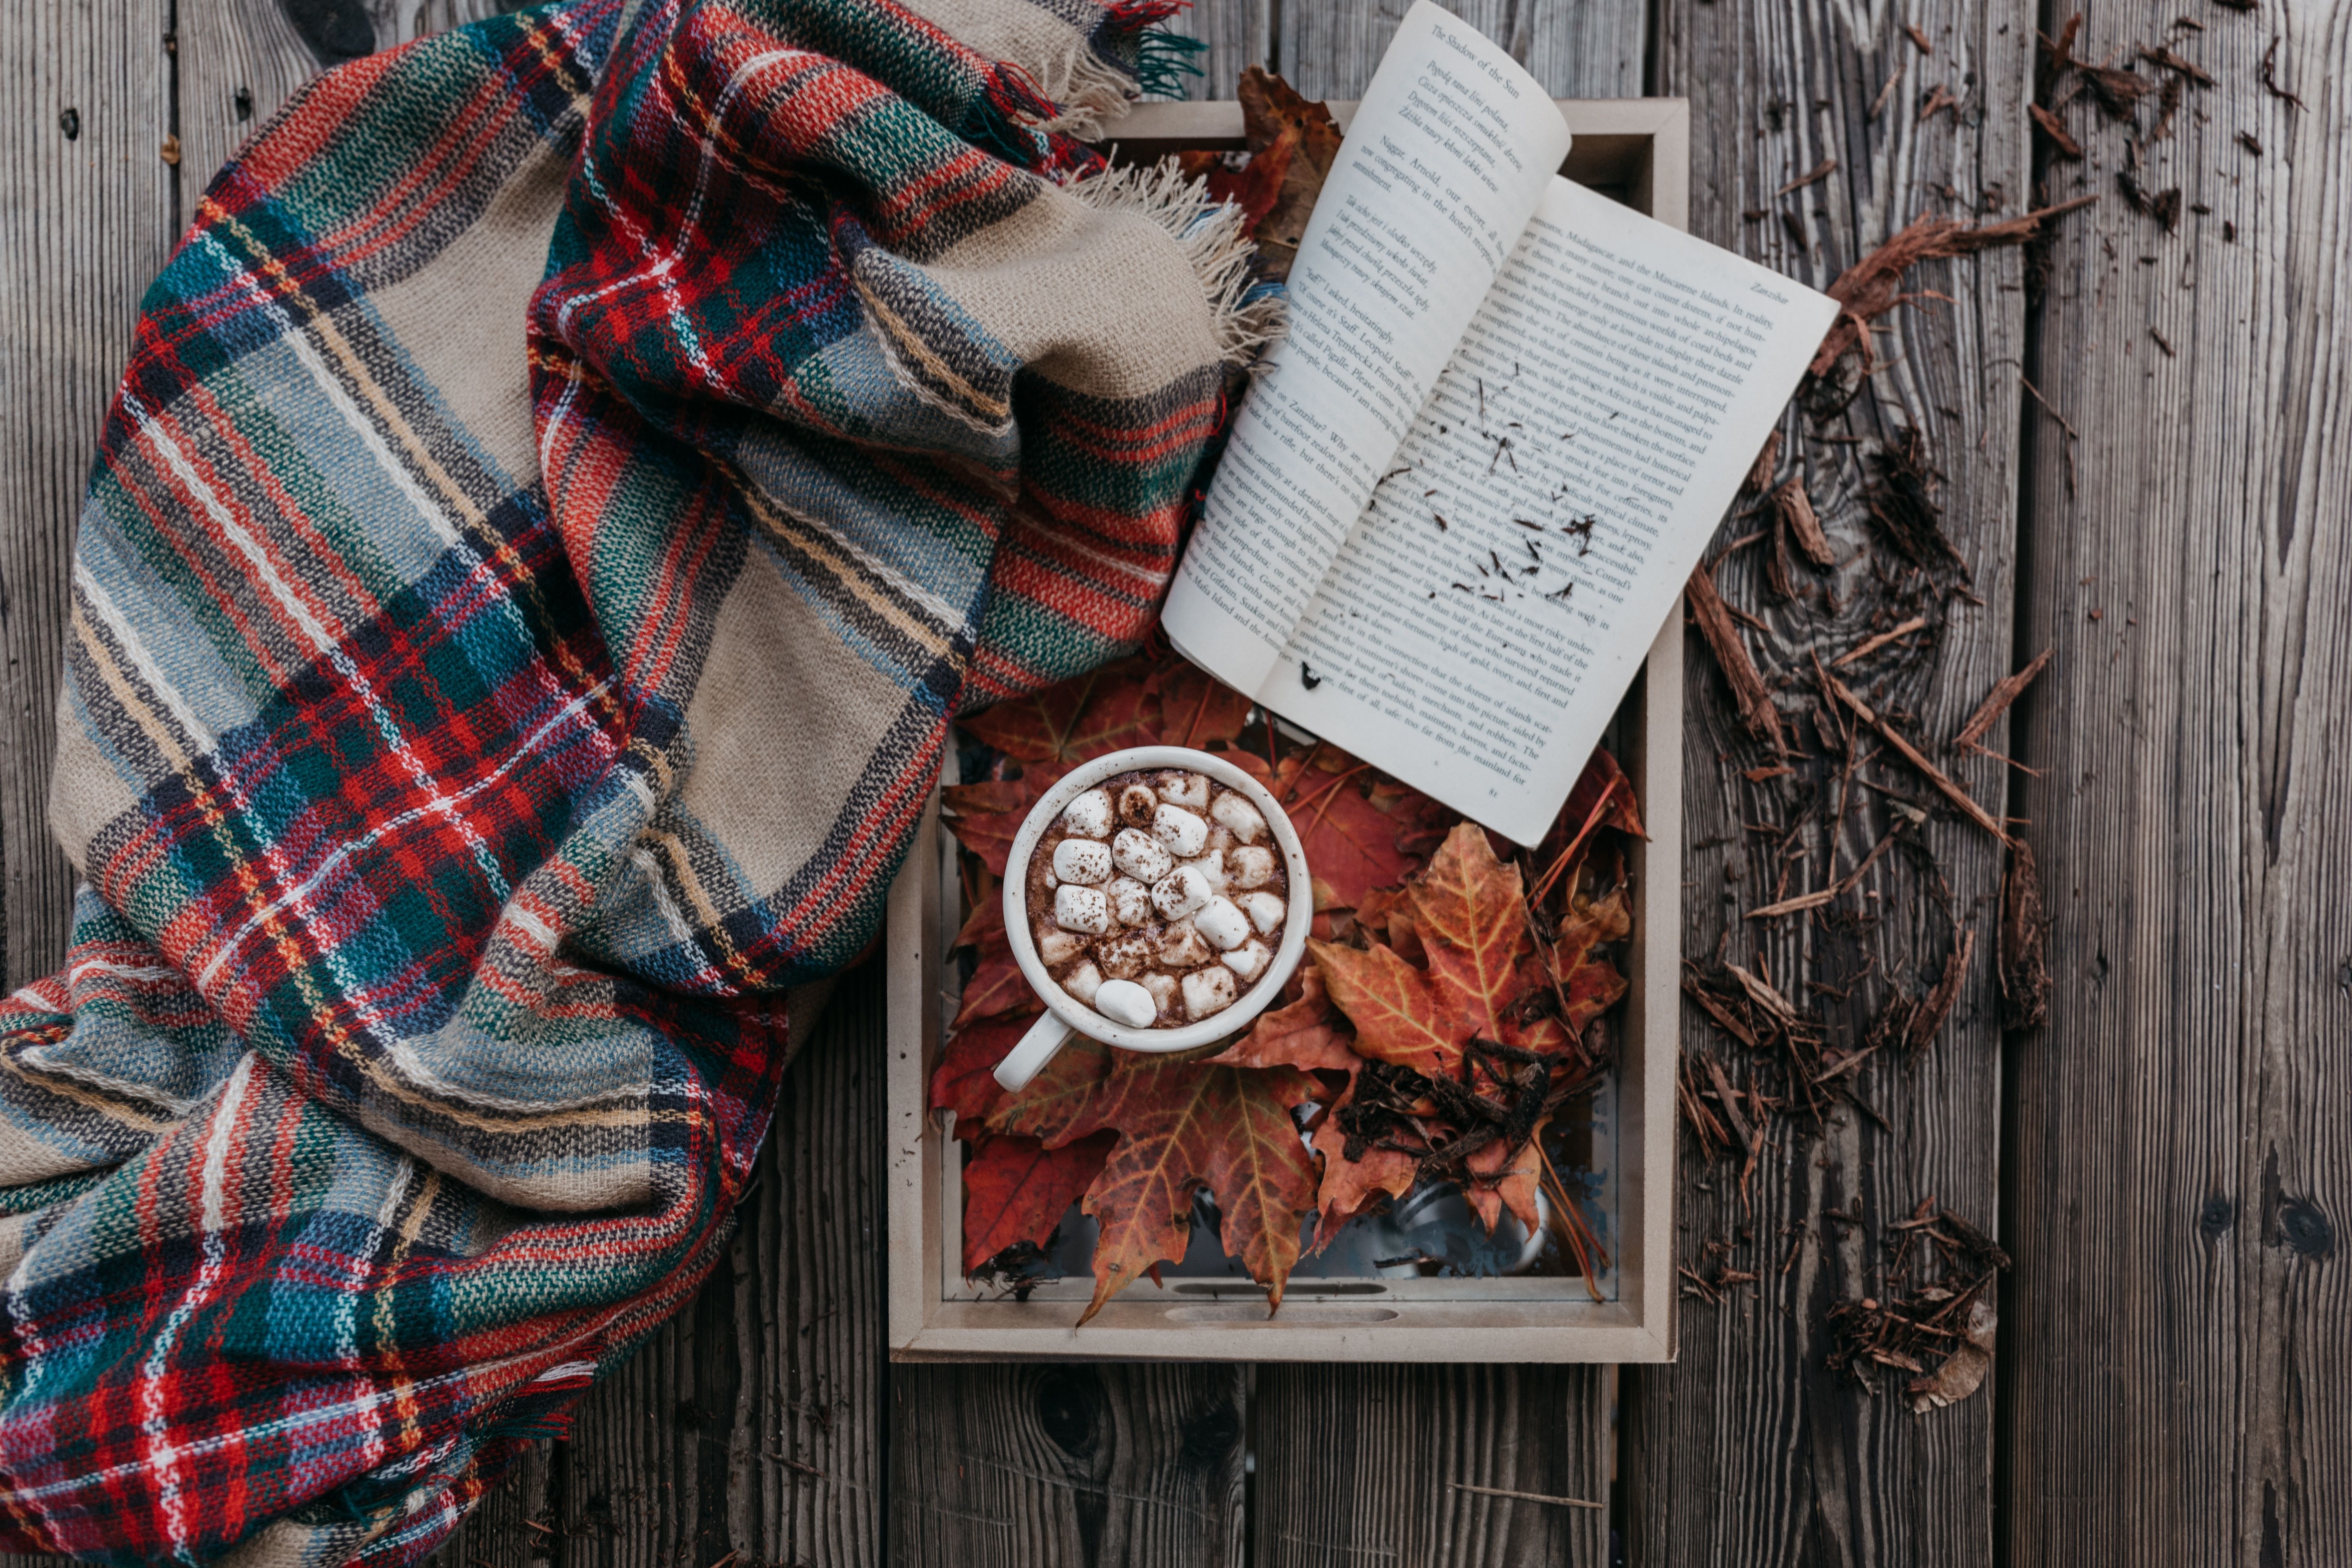 5760x3840 #topdown, #table, #wooden, #hot chocolate, #fall leafe, #leaf, #blanket, #leaves, #autumn, #read, #Free picture, #text, #book, #tray, #still life, #open, #on the table, #marshmallow, #cold, #fall, #drink. Mocah.org HD